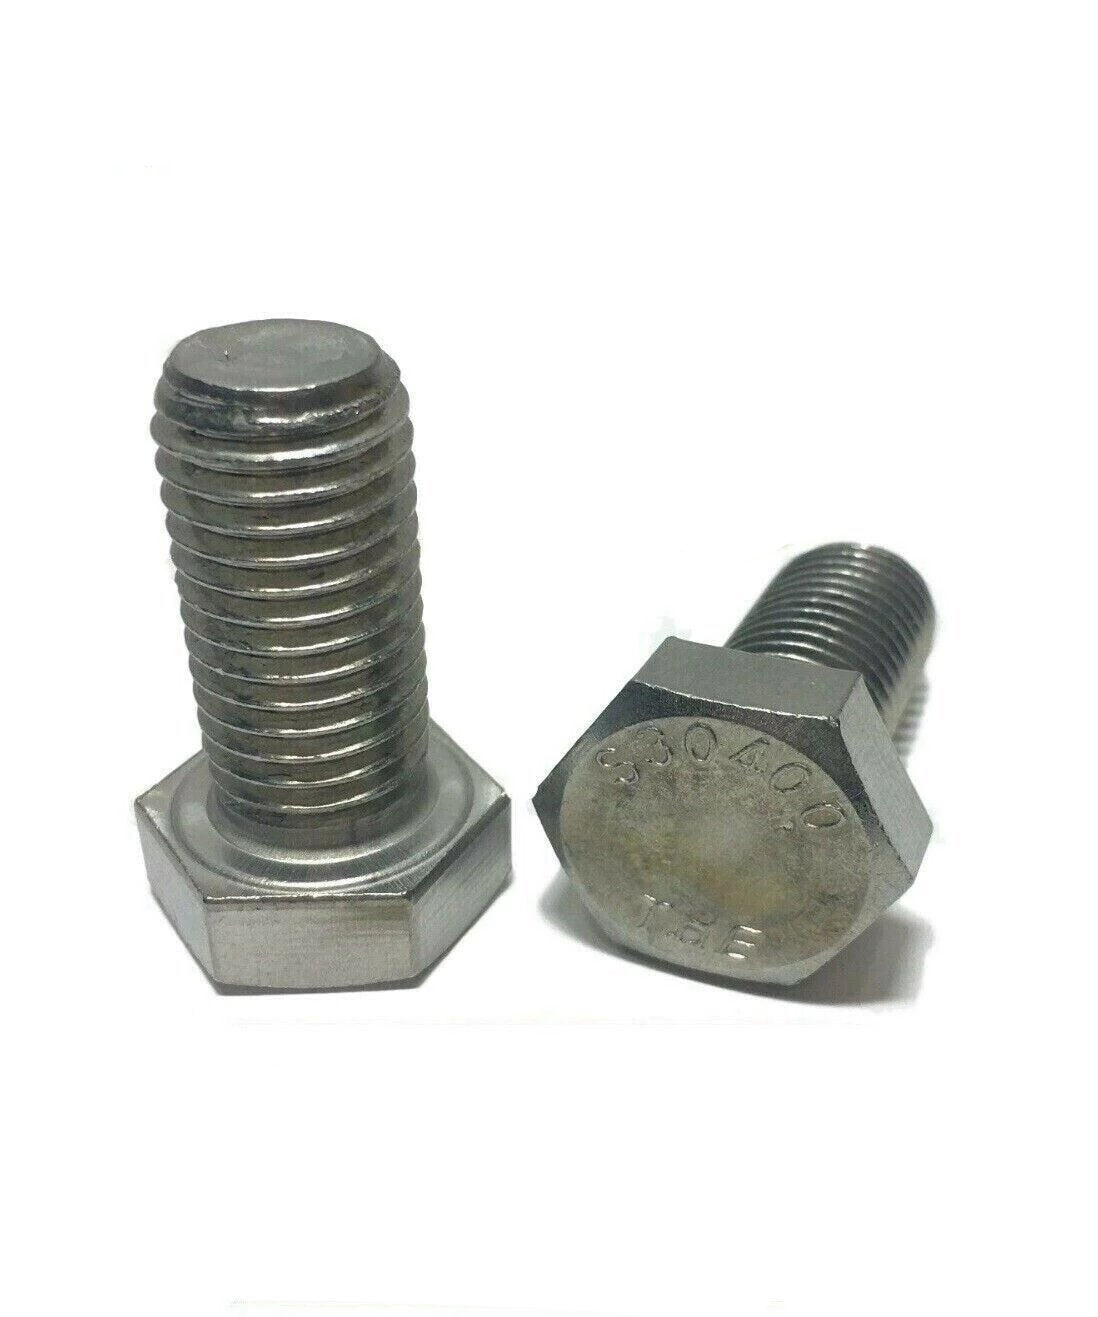 3/4"-10 x 1 1/4" Stainless Steel Hex Cap Screw / Tap Bolt 18-8 / 304